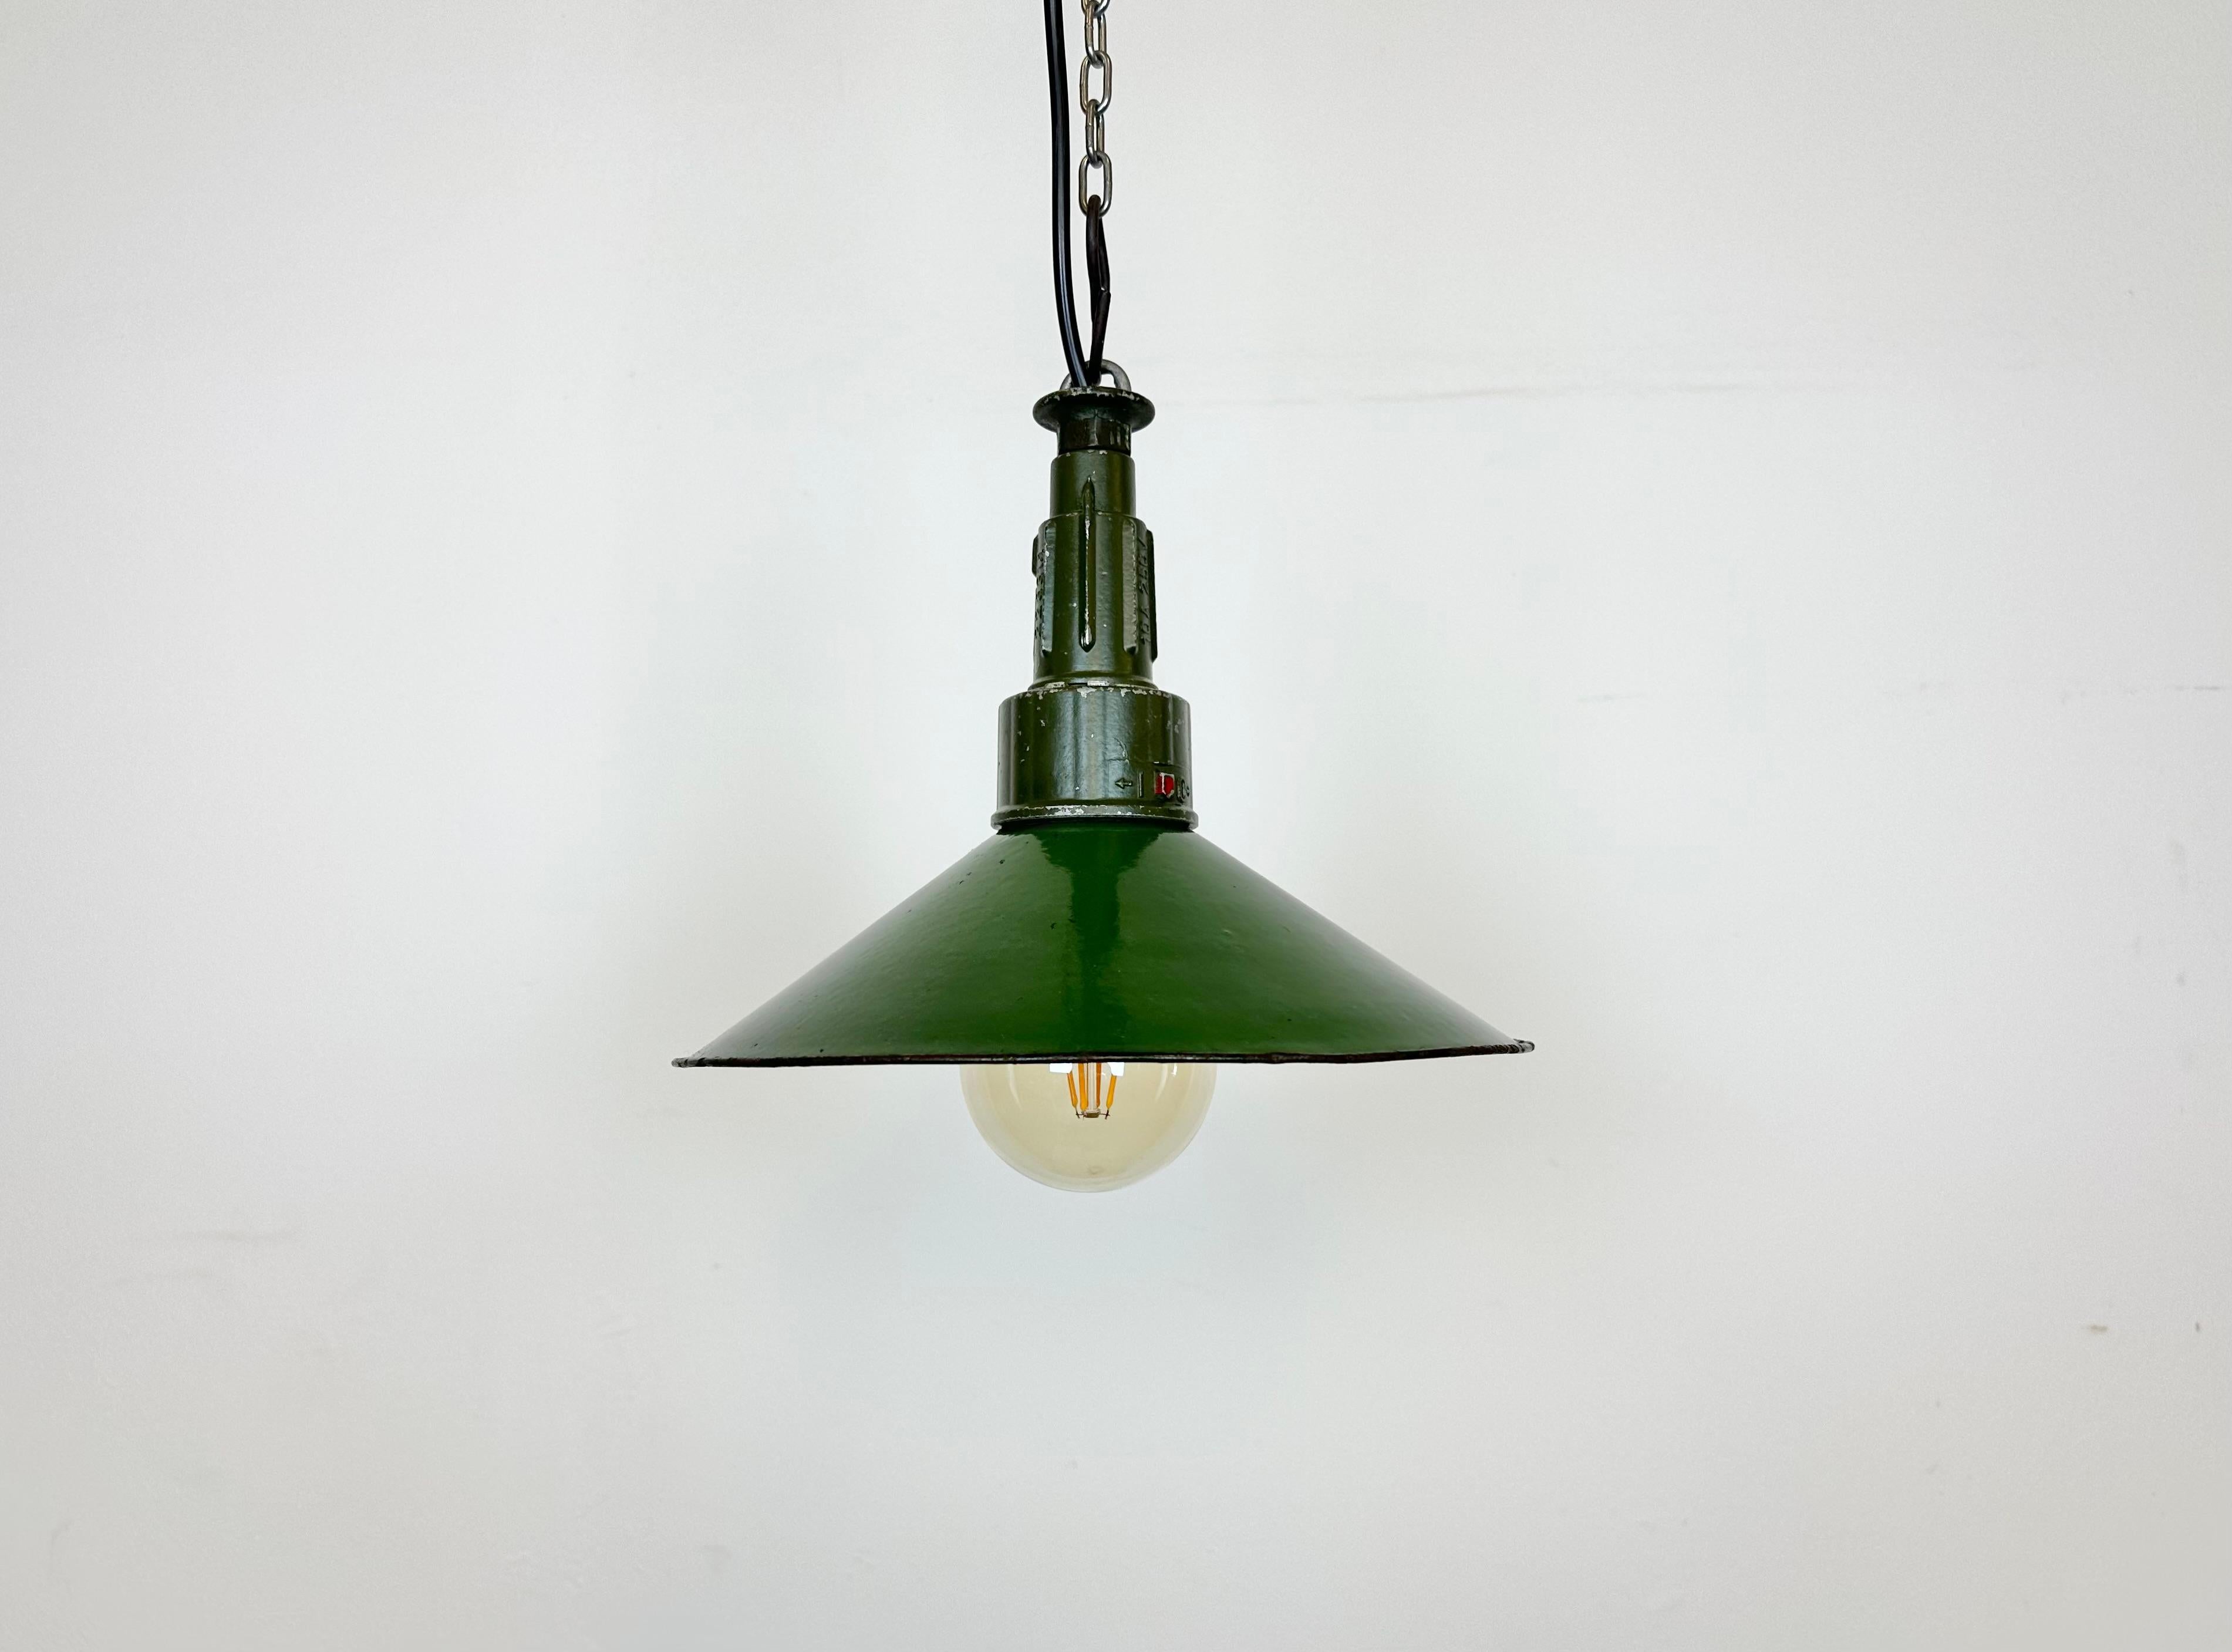 Industrial green enamel pendant light made in Poland during the 1960s. White enamel inside the shade. Green cast aluminium top. The socket requires standard E 27/ E26 light bulbs. New wire. The diameter of the shade is 26cm. The weight of the lamp